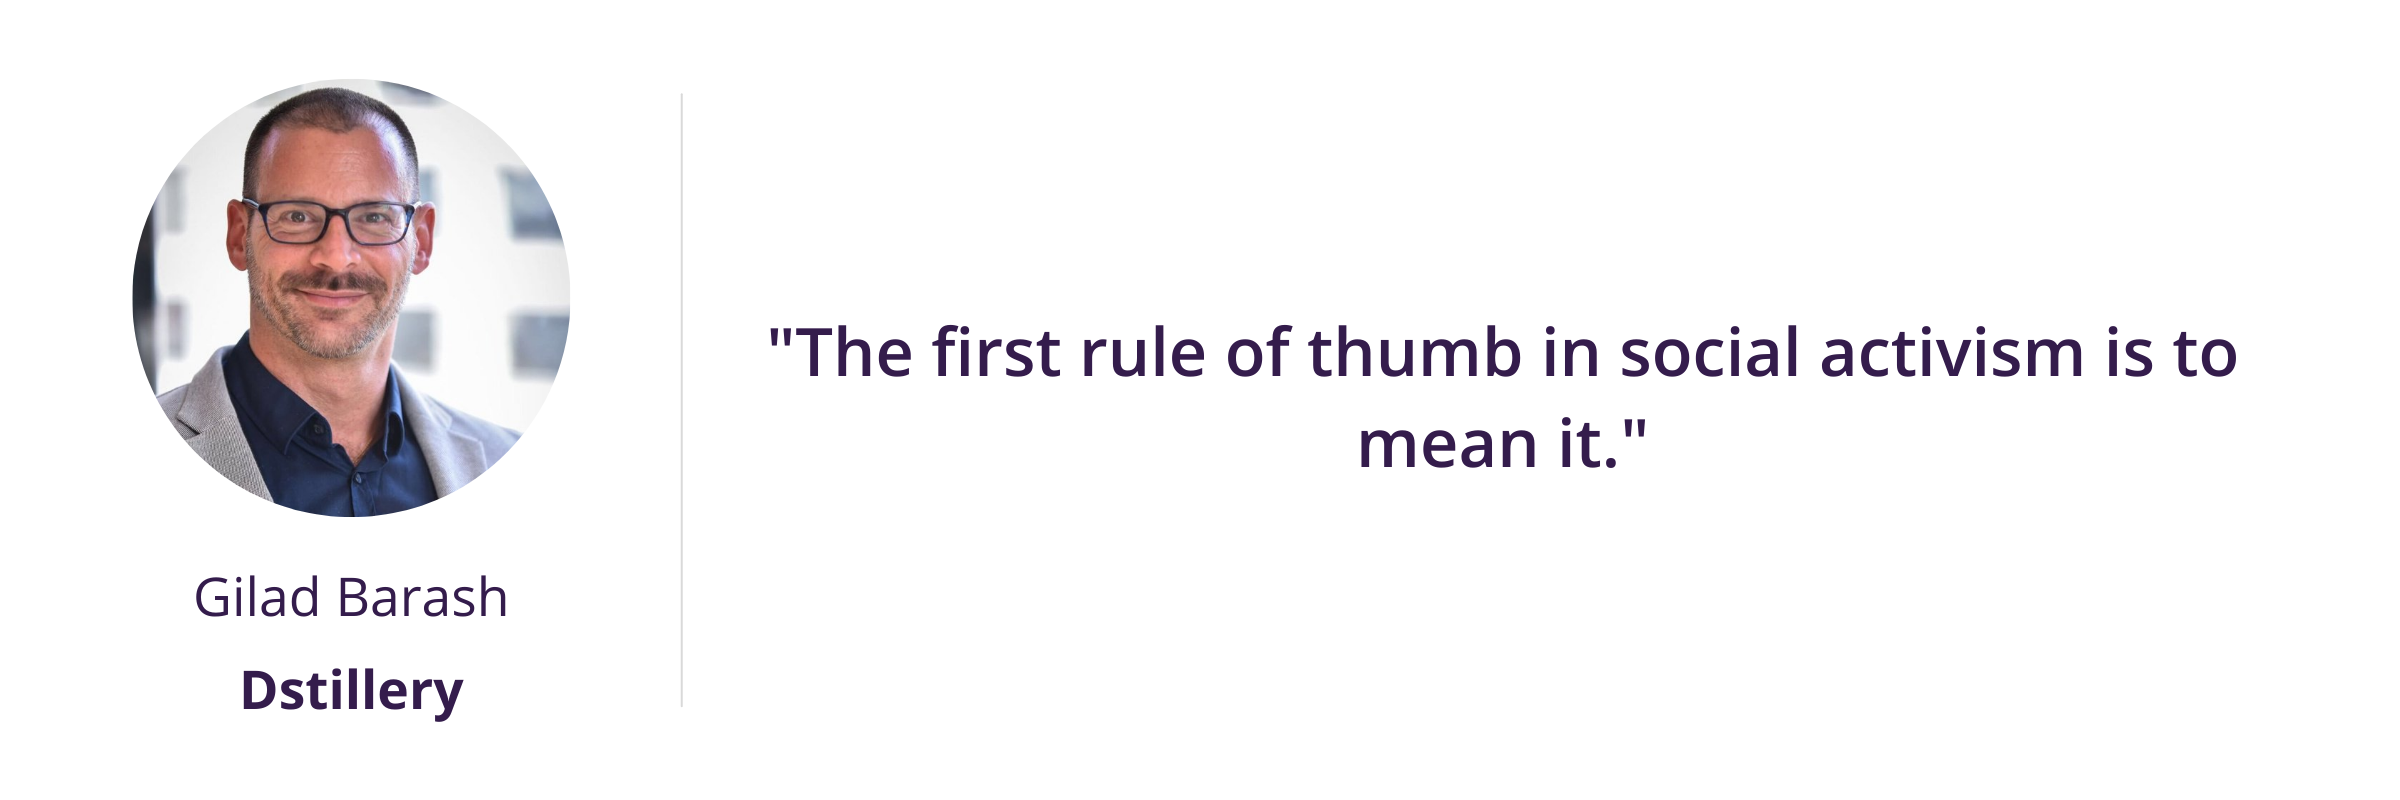 "The first rule of thumb in social activism is to mean it."